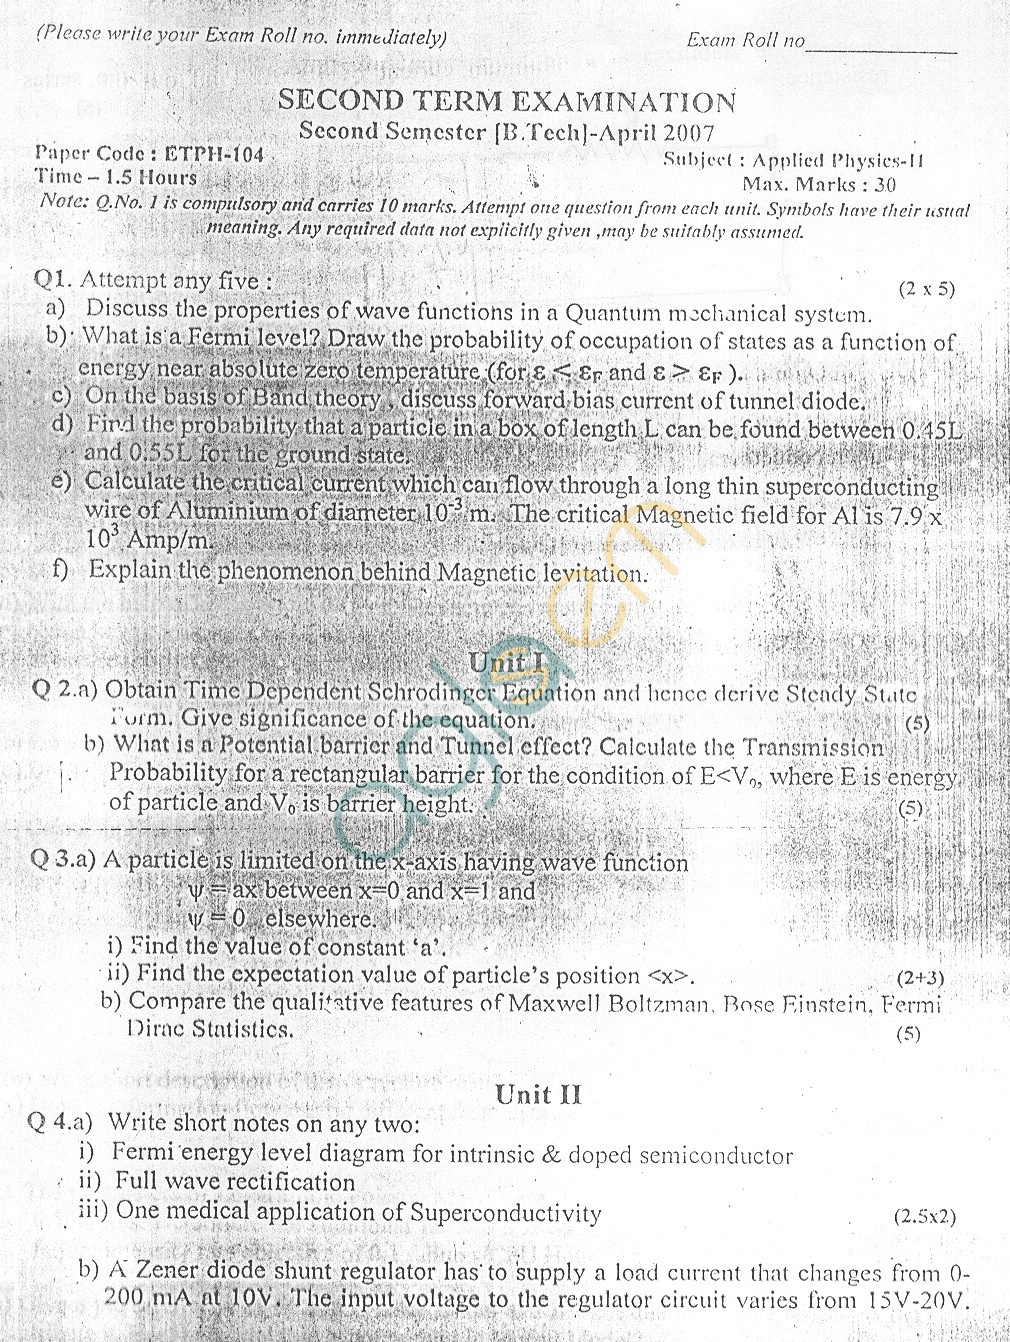 GGSIPU Question Papers Second Semester  Second Term 2007  ETPH-104